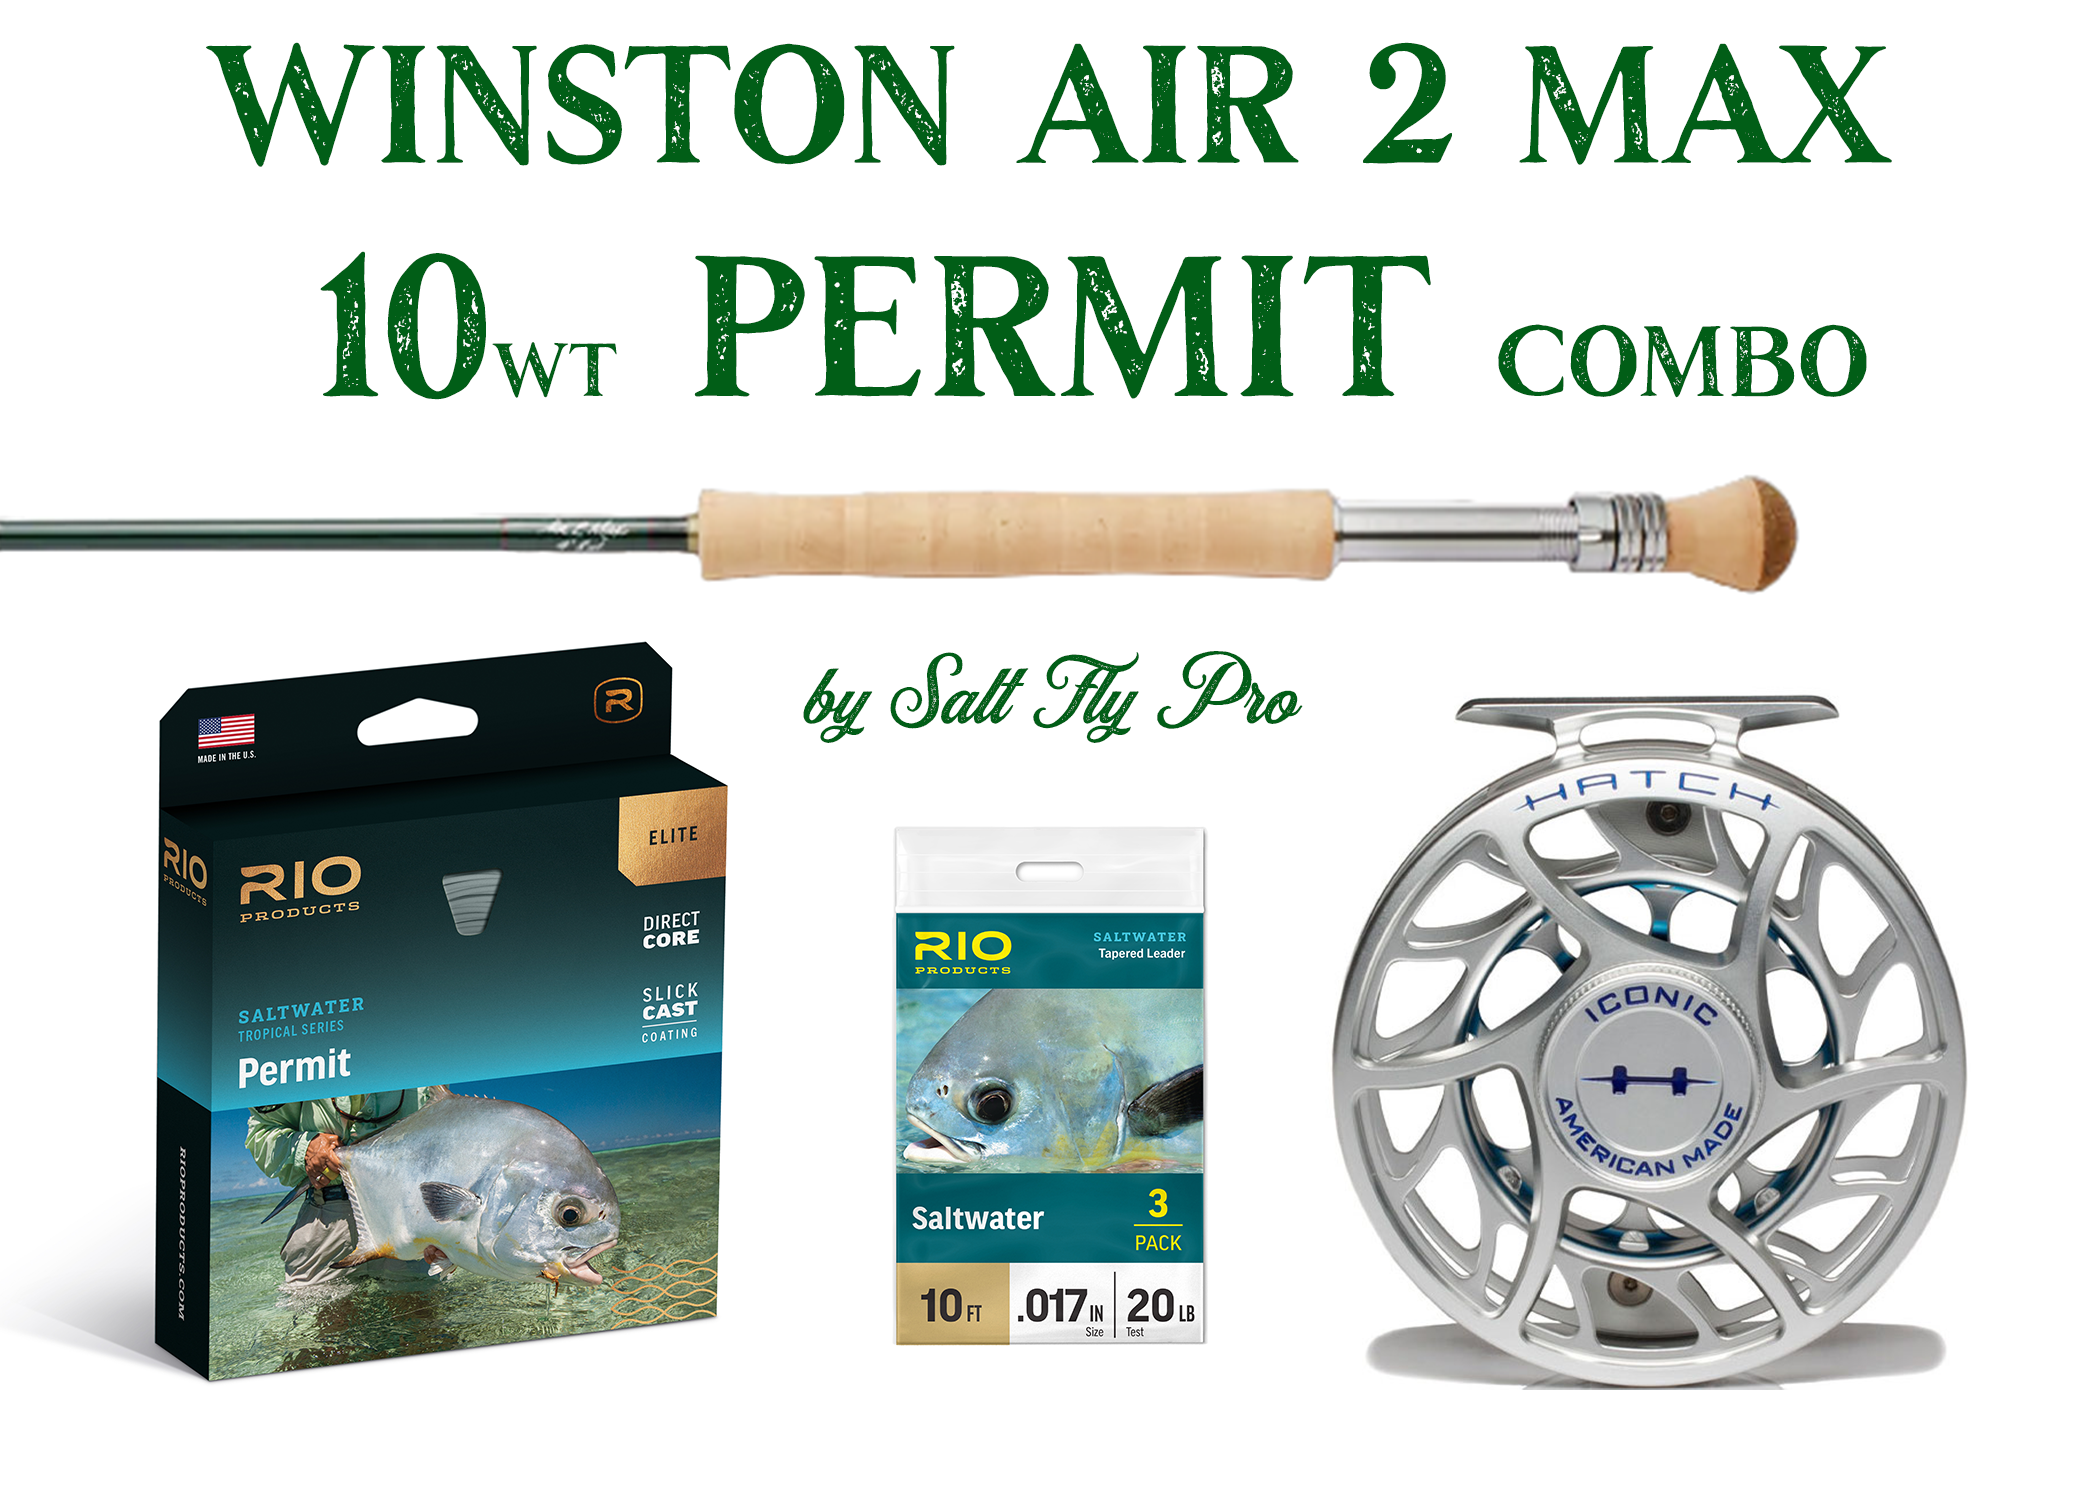 Winston AIR 2 MAX 10wt PERMIT Fly Rod Combo Outfit - NEW!